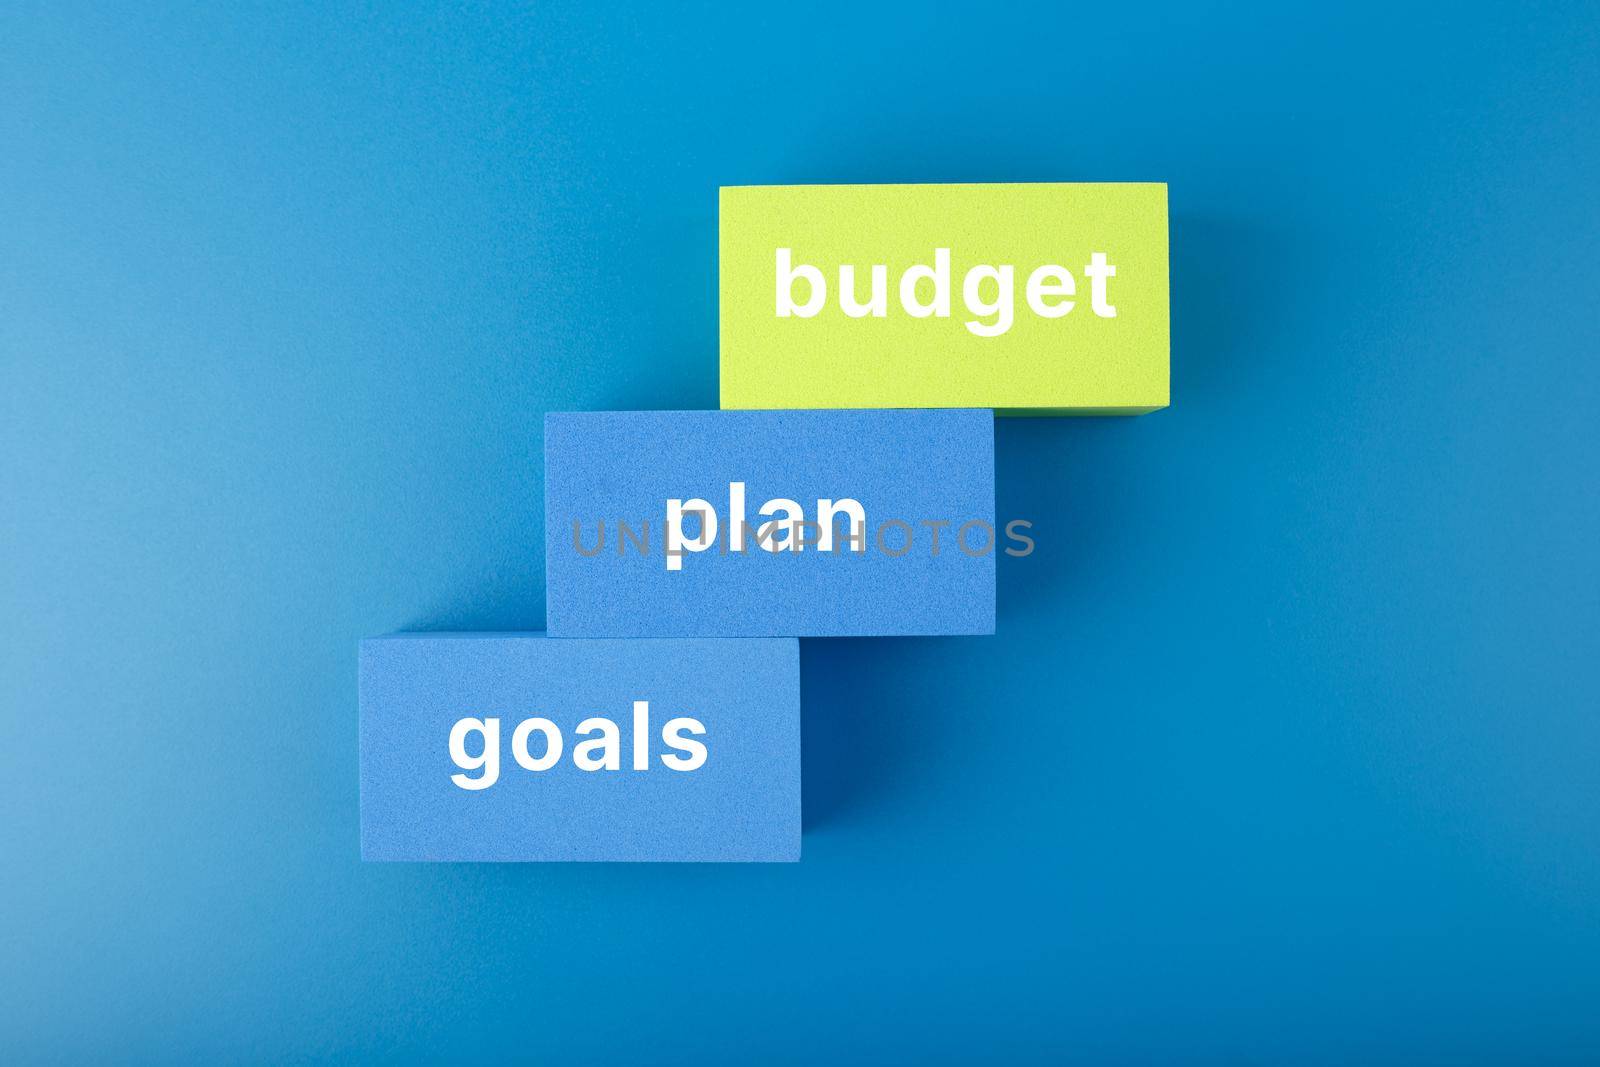 Business plan concept. Budget, plan, goals written on colored blue and yellow rectangles on dark blue background. Financial goals 